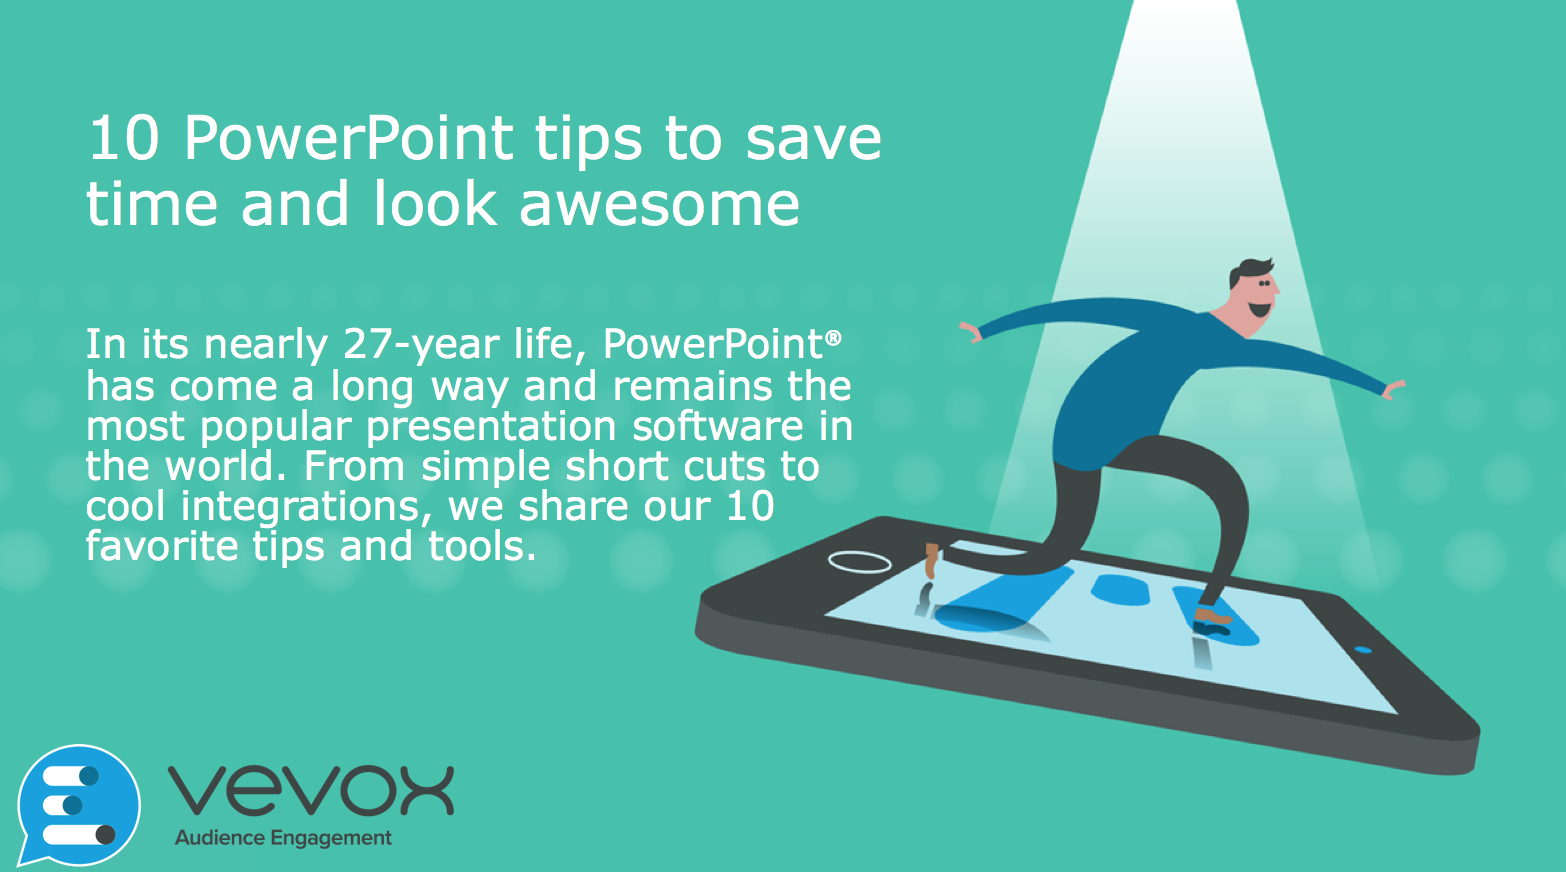 10 PowerPoint tips to save time and look awesome